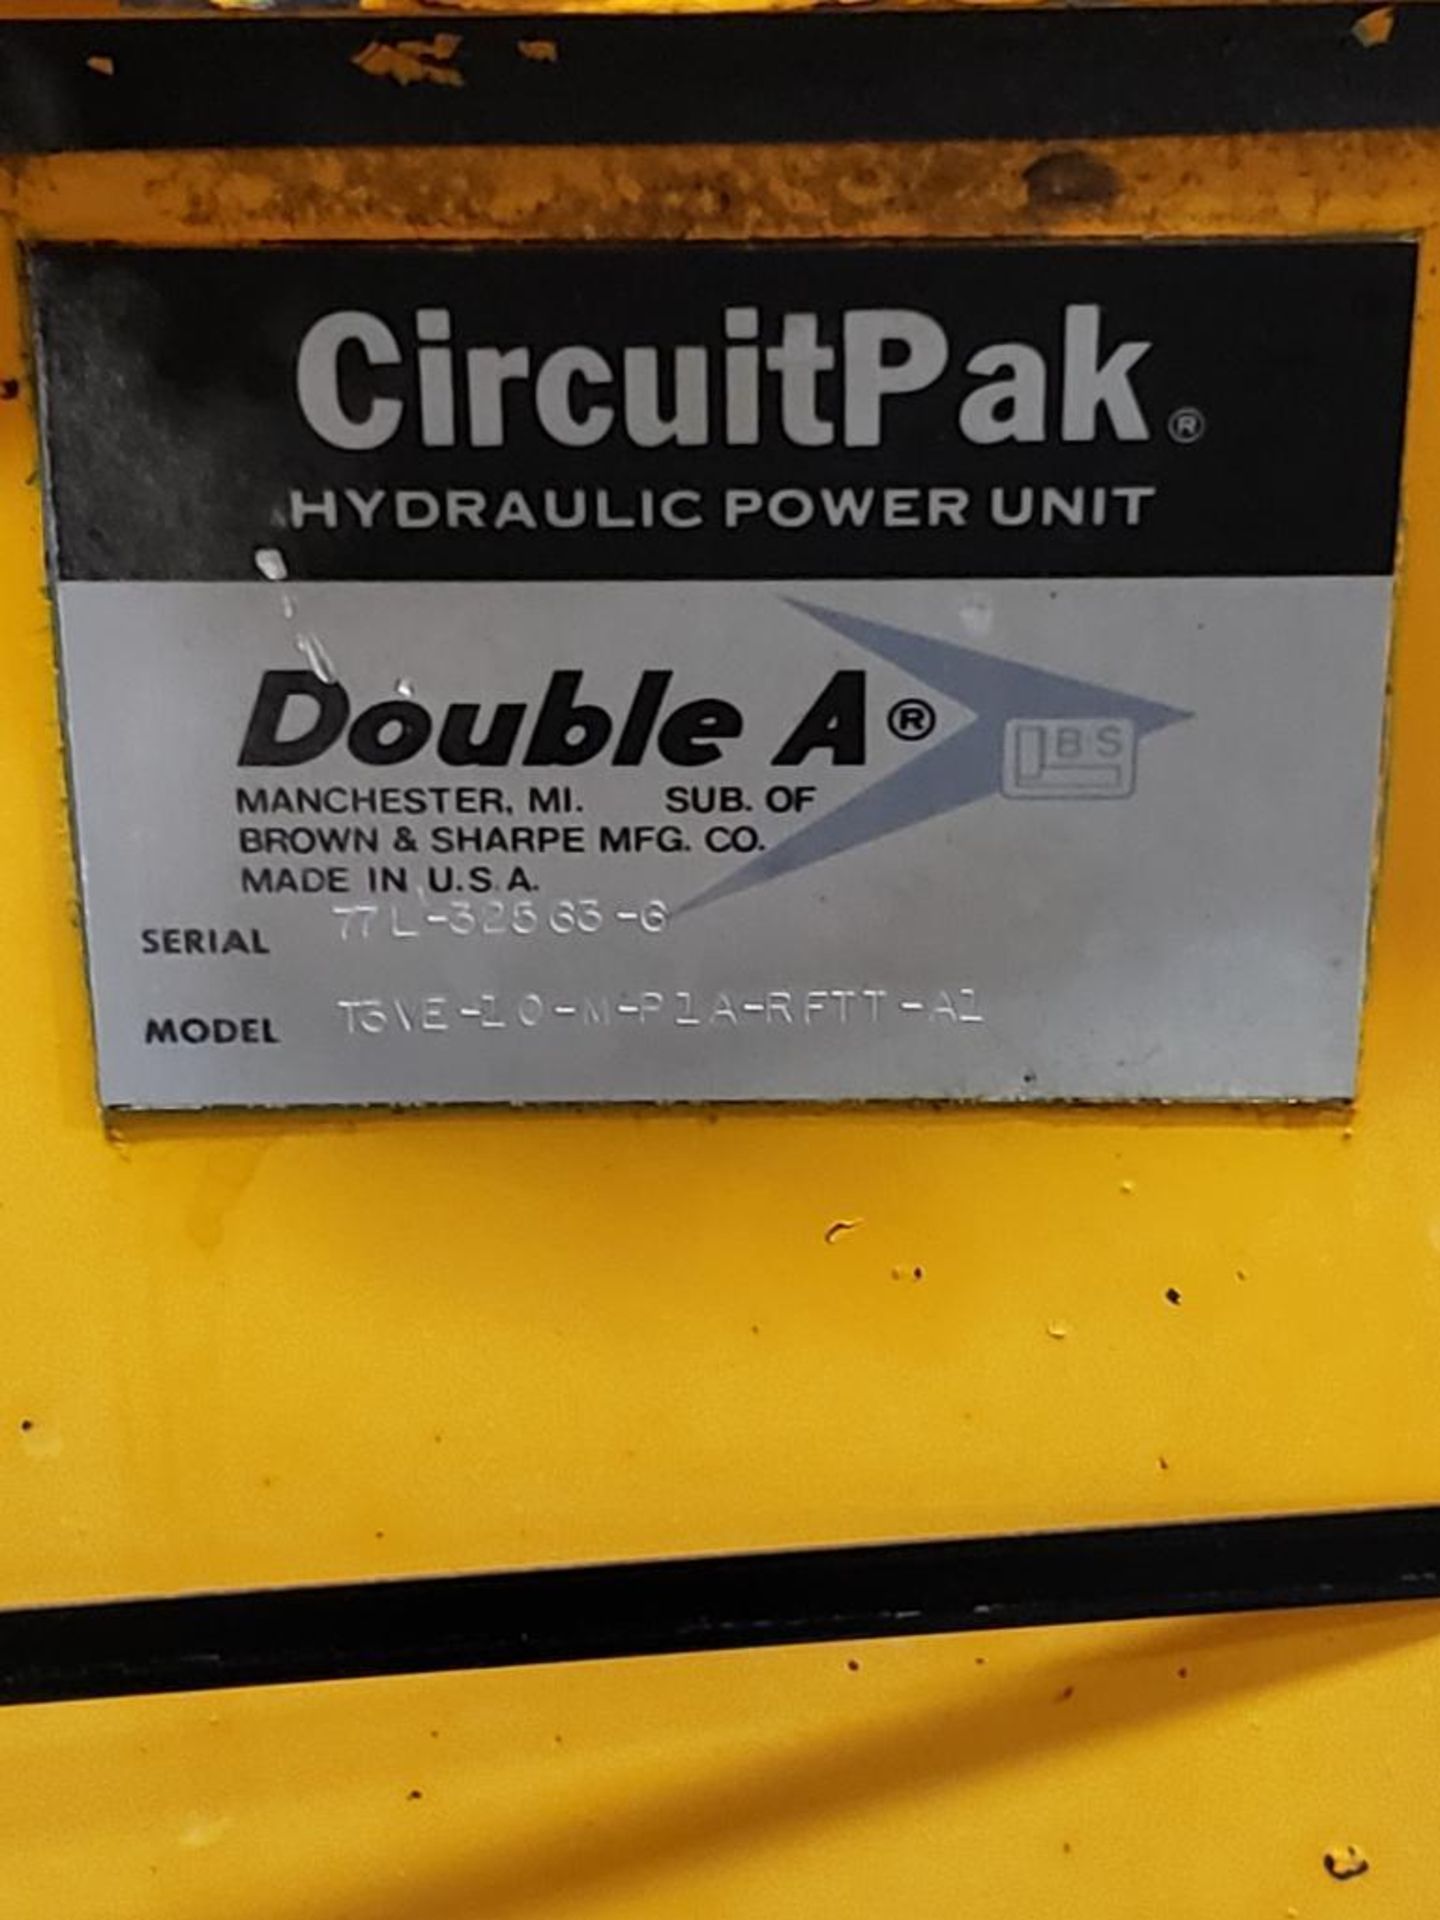 Double A CircuitPak Hydraulic power unit T3VE-10-M-P1A-RFTT-A1. 1.5HP, 3PH, 208-220/440V. - Image 2 of 4